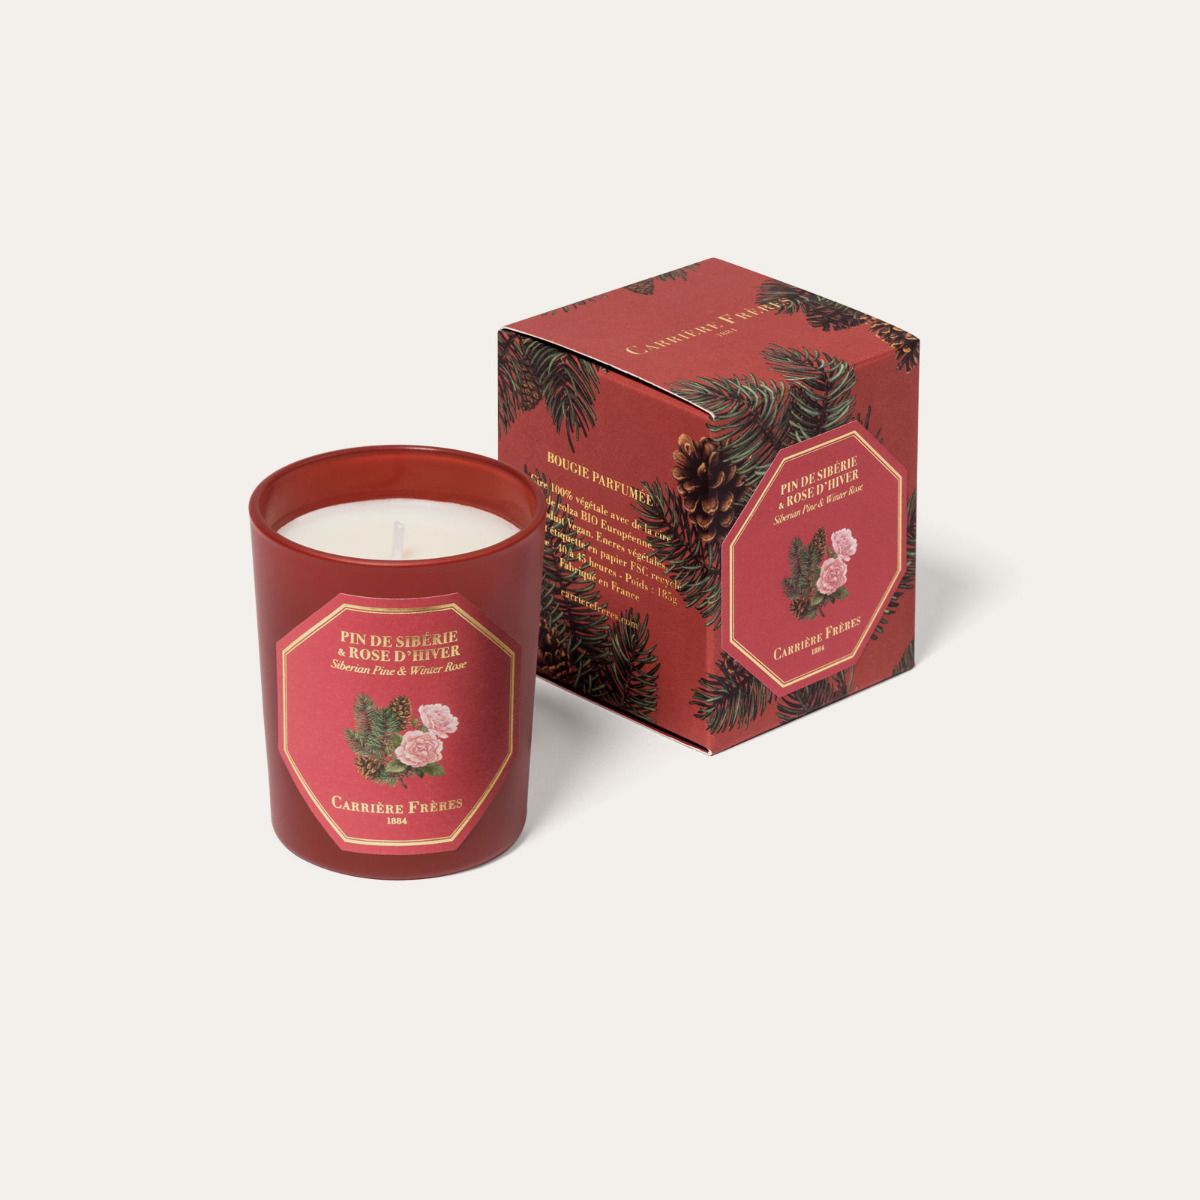 Siberian Pine & Winter Rose Small Scented Candle